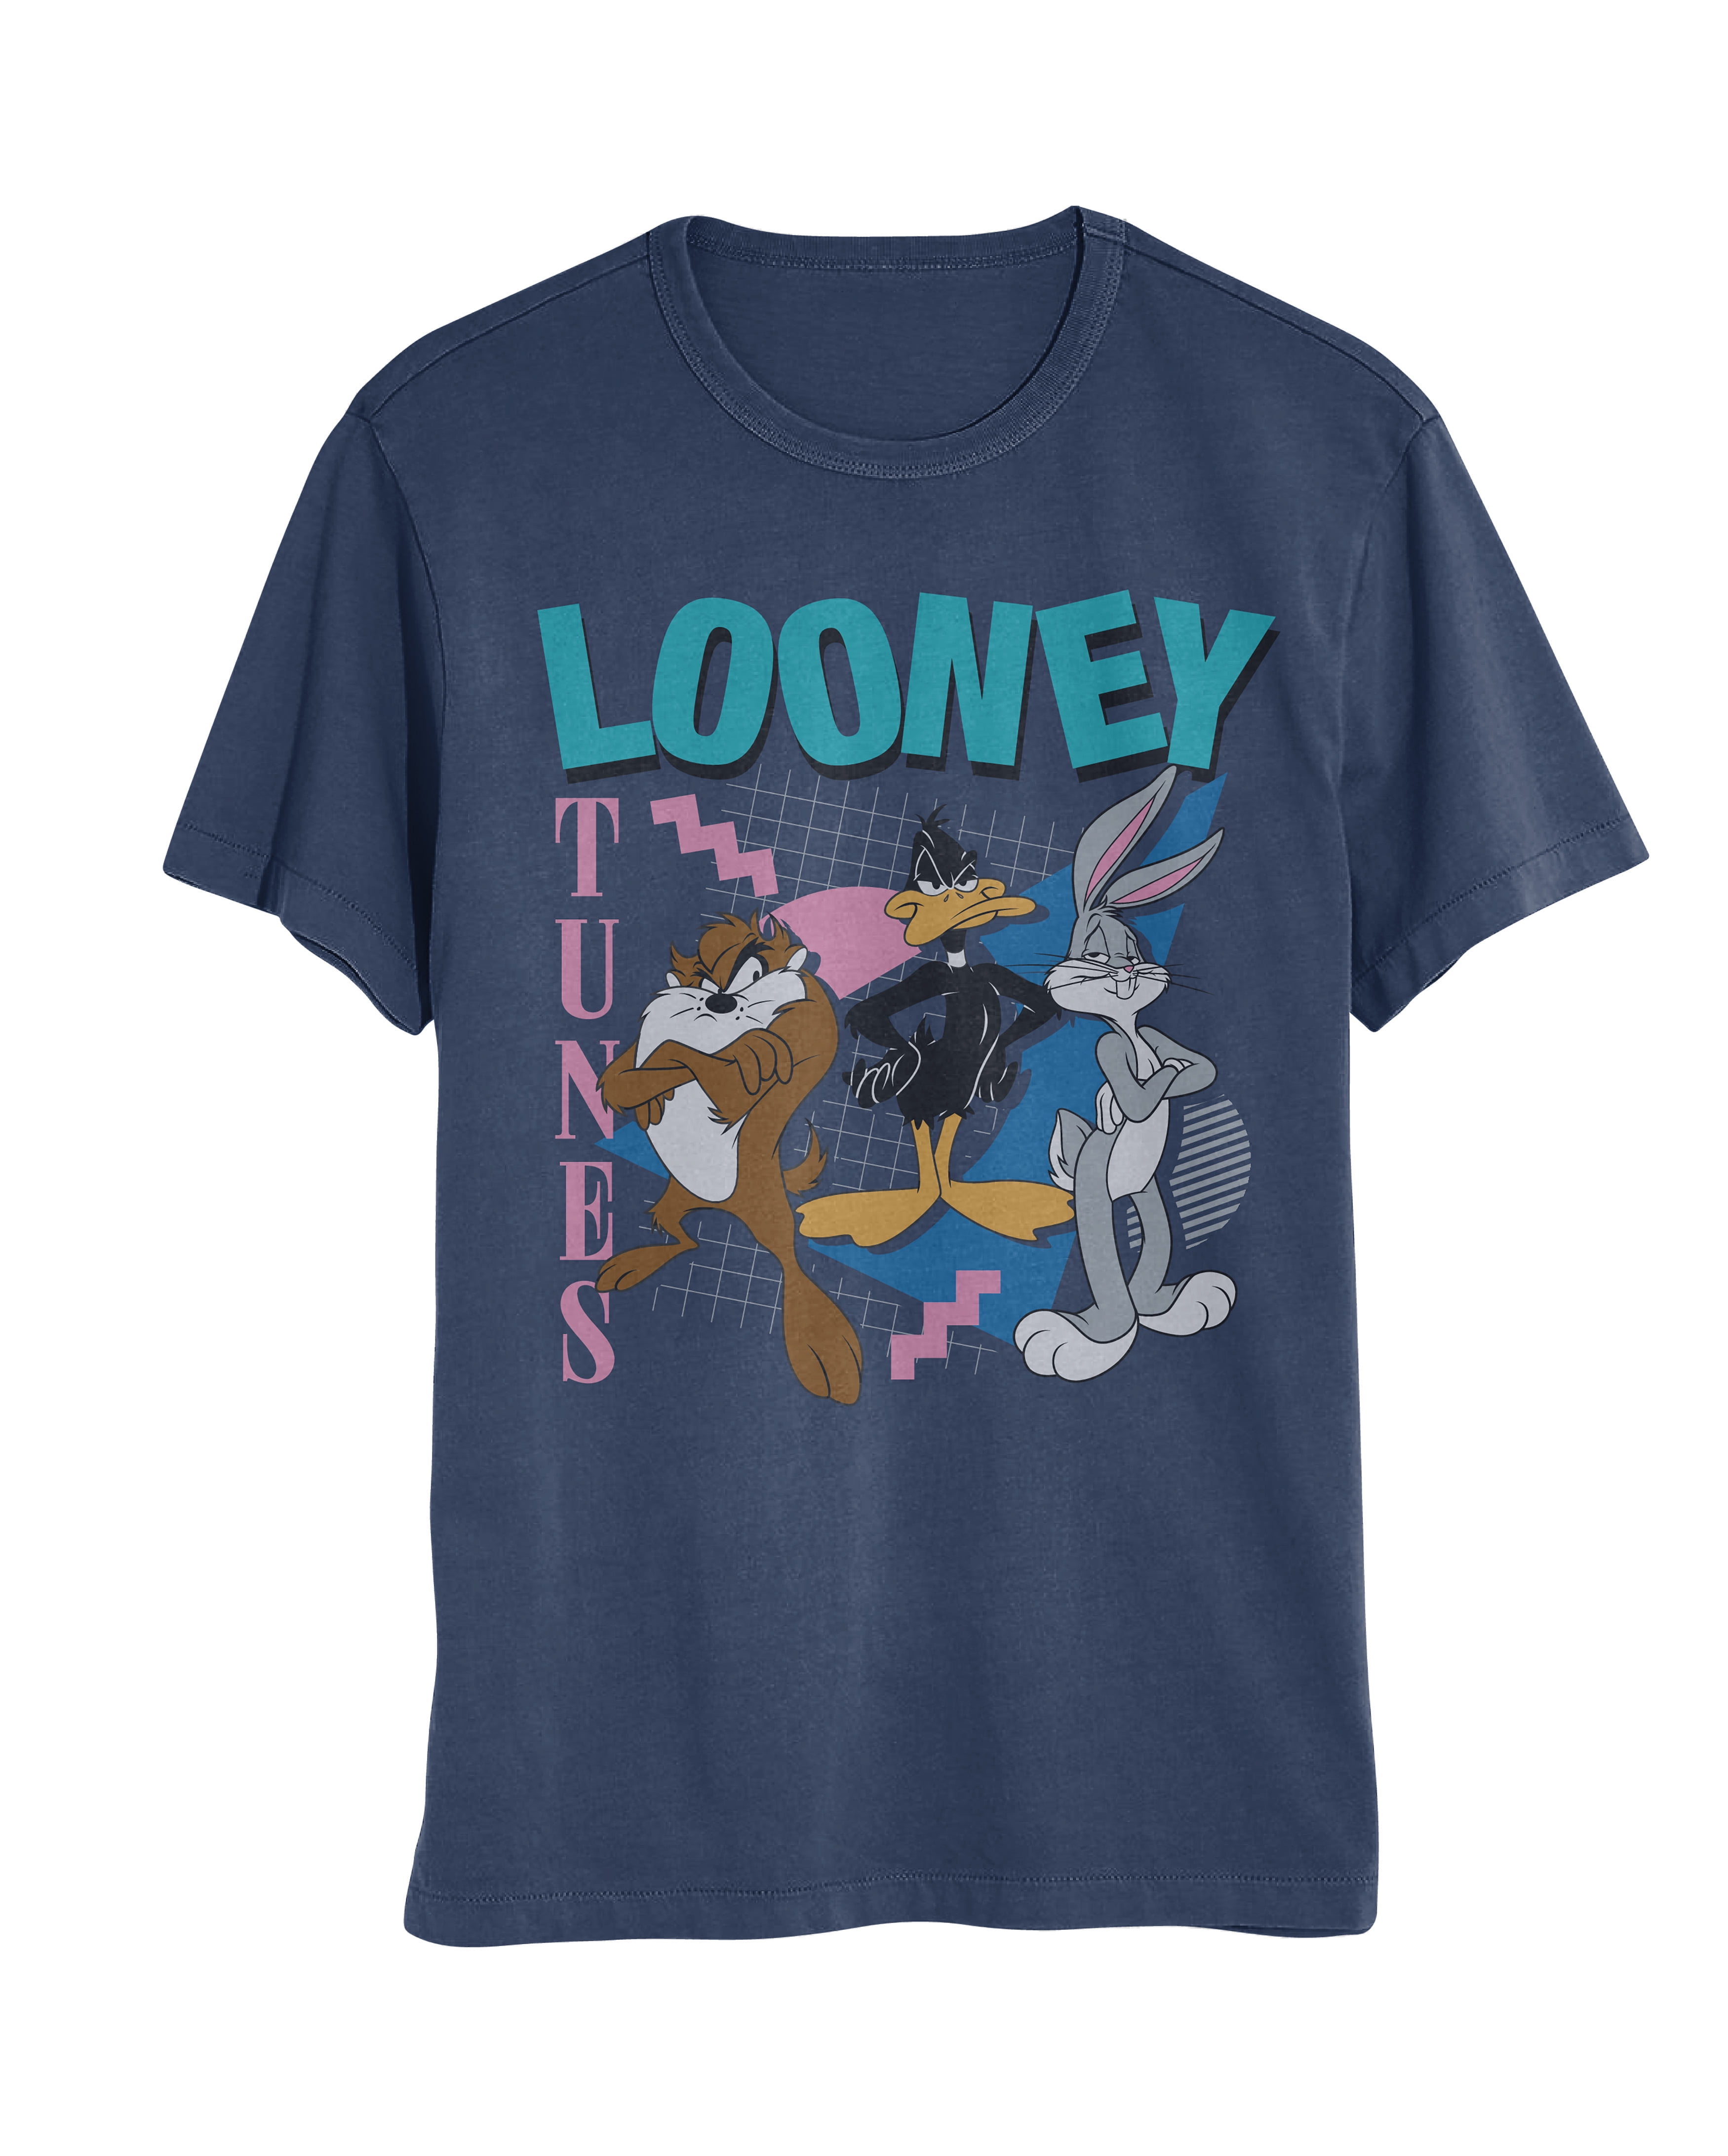 Looney Tunes Taz, Daffy and Bugs Bunny Mens and Womens Short Sleeve T-Shirt  (White, S-XXL)